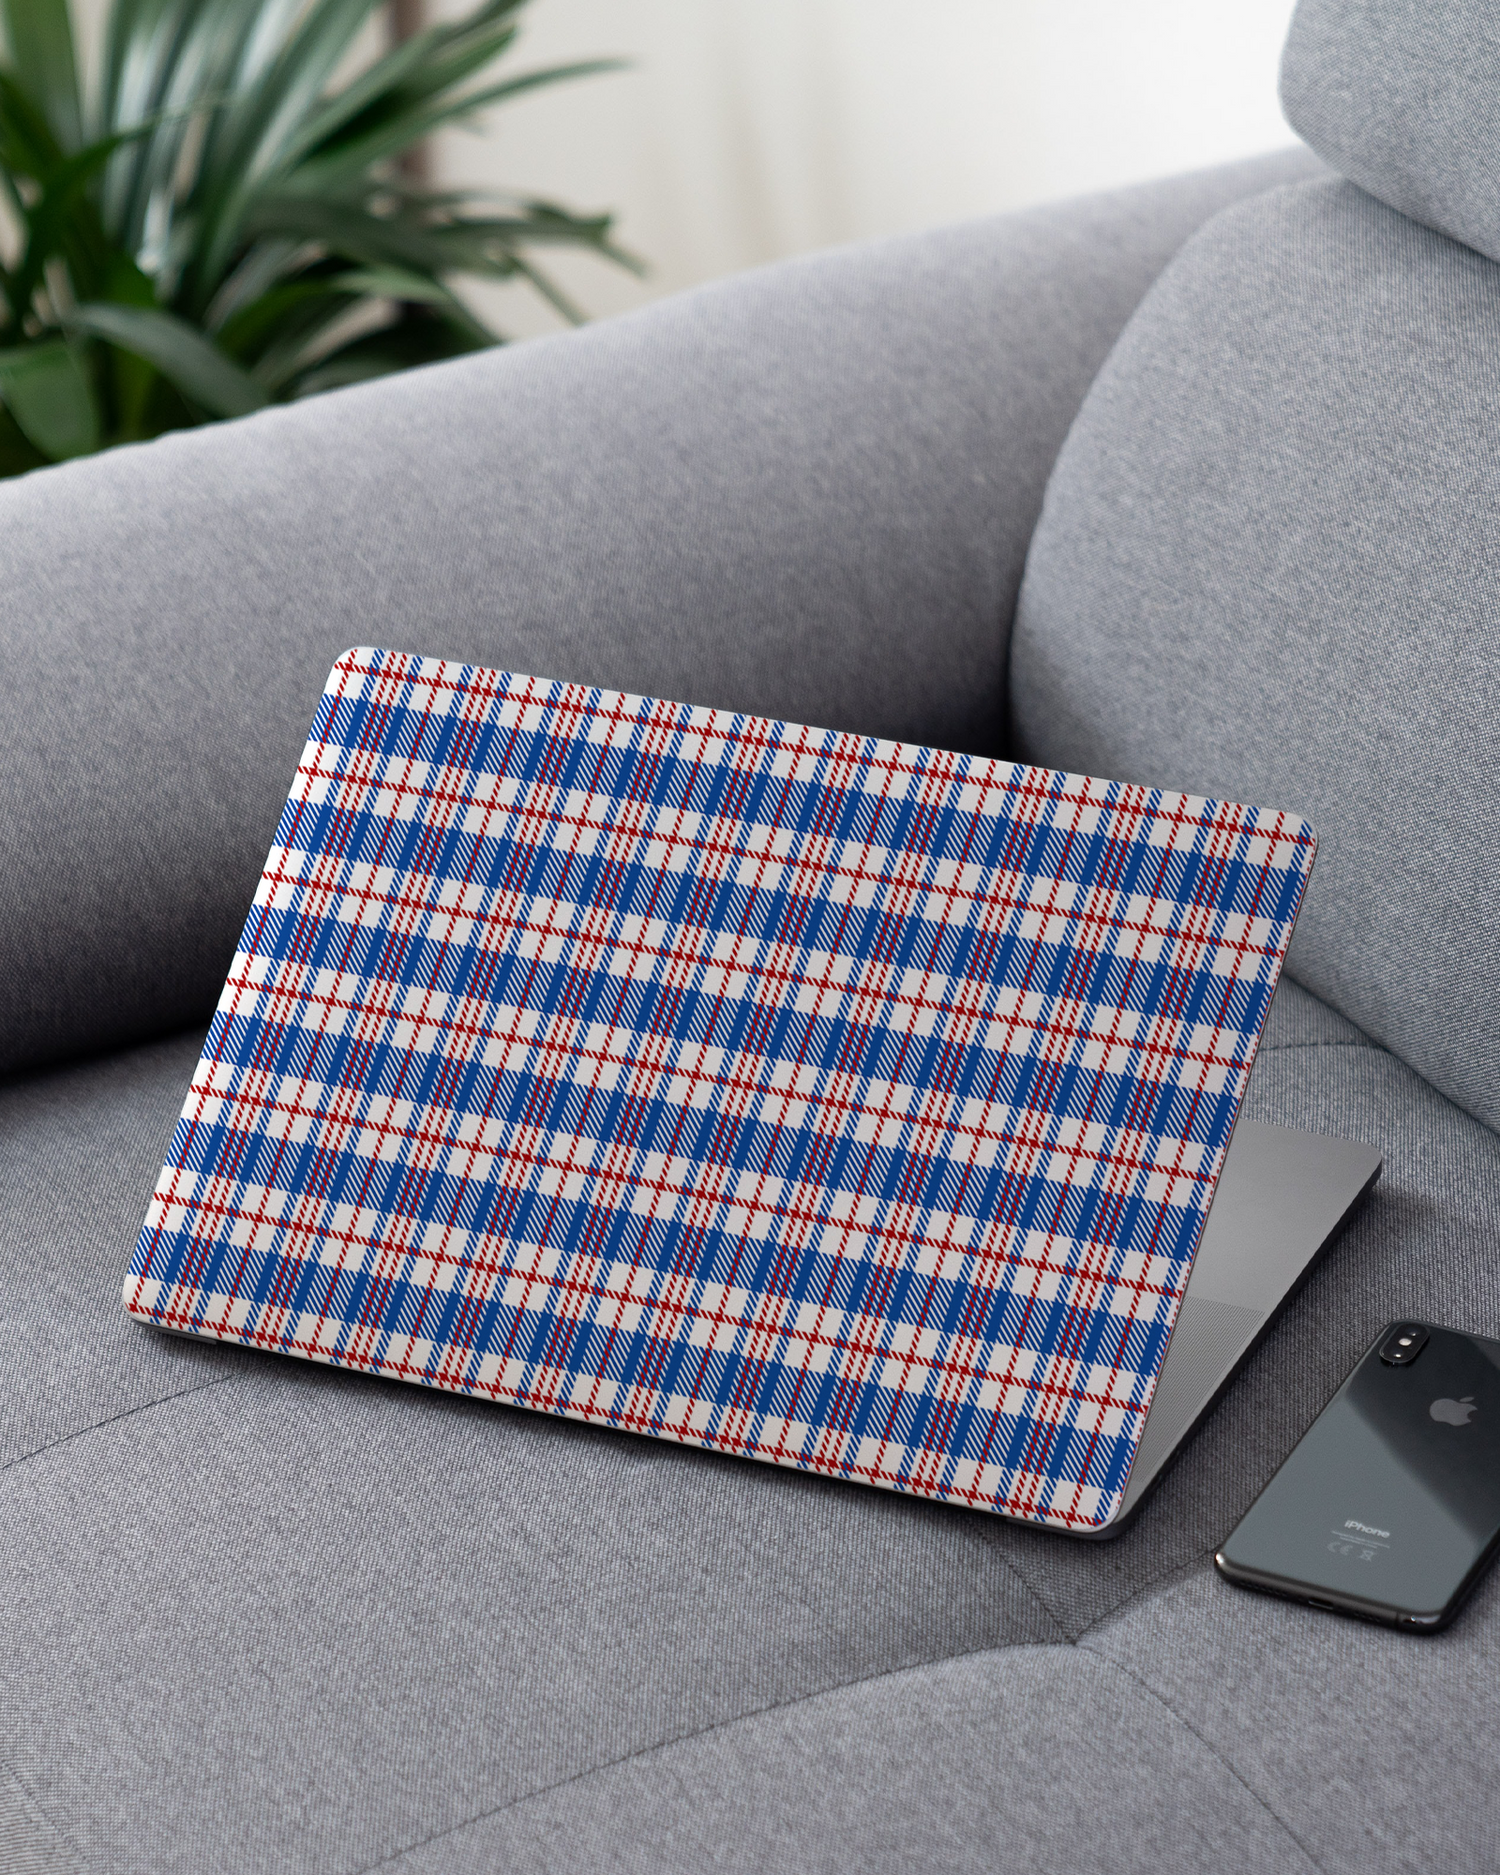 Plaid Market Bag Laptop Skin for 13 inch Apple MacBooks on a couch